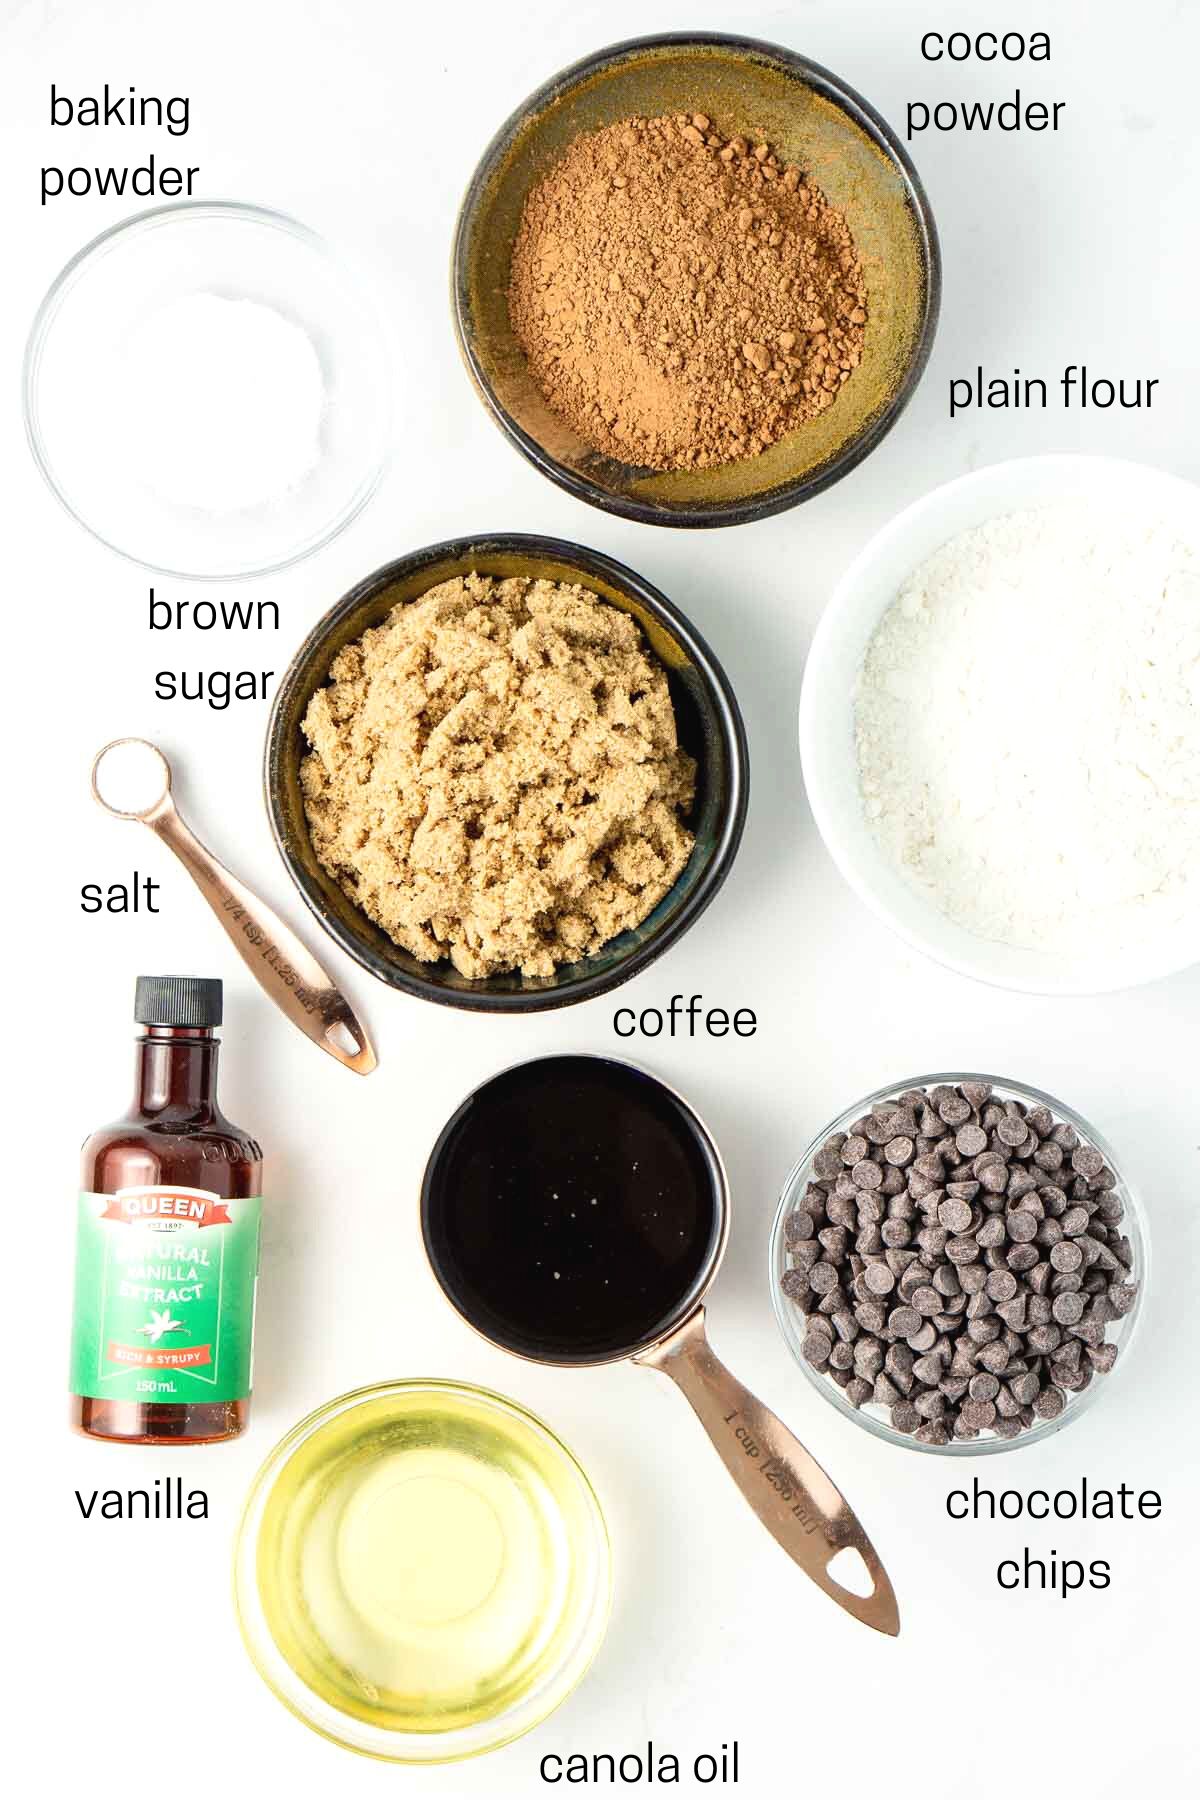 All ingredients needed to make vegan chocolate muffins laid out in small bowls.